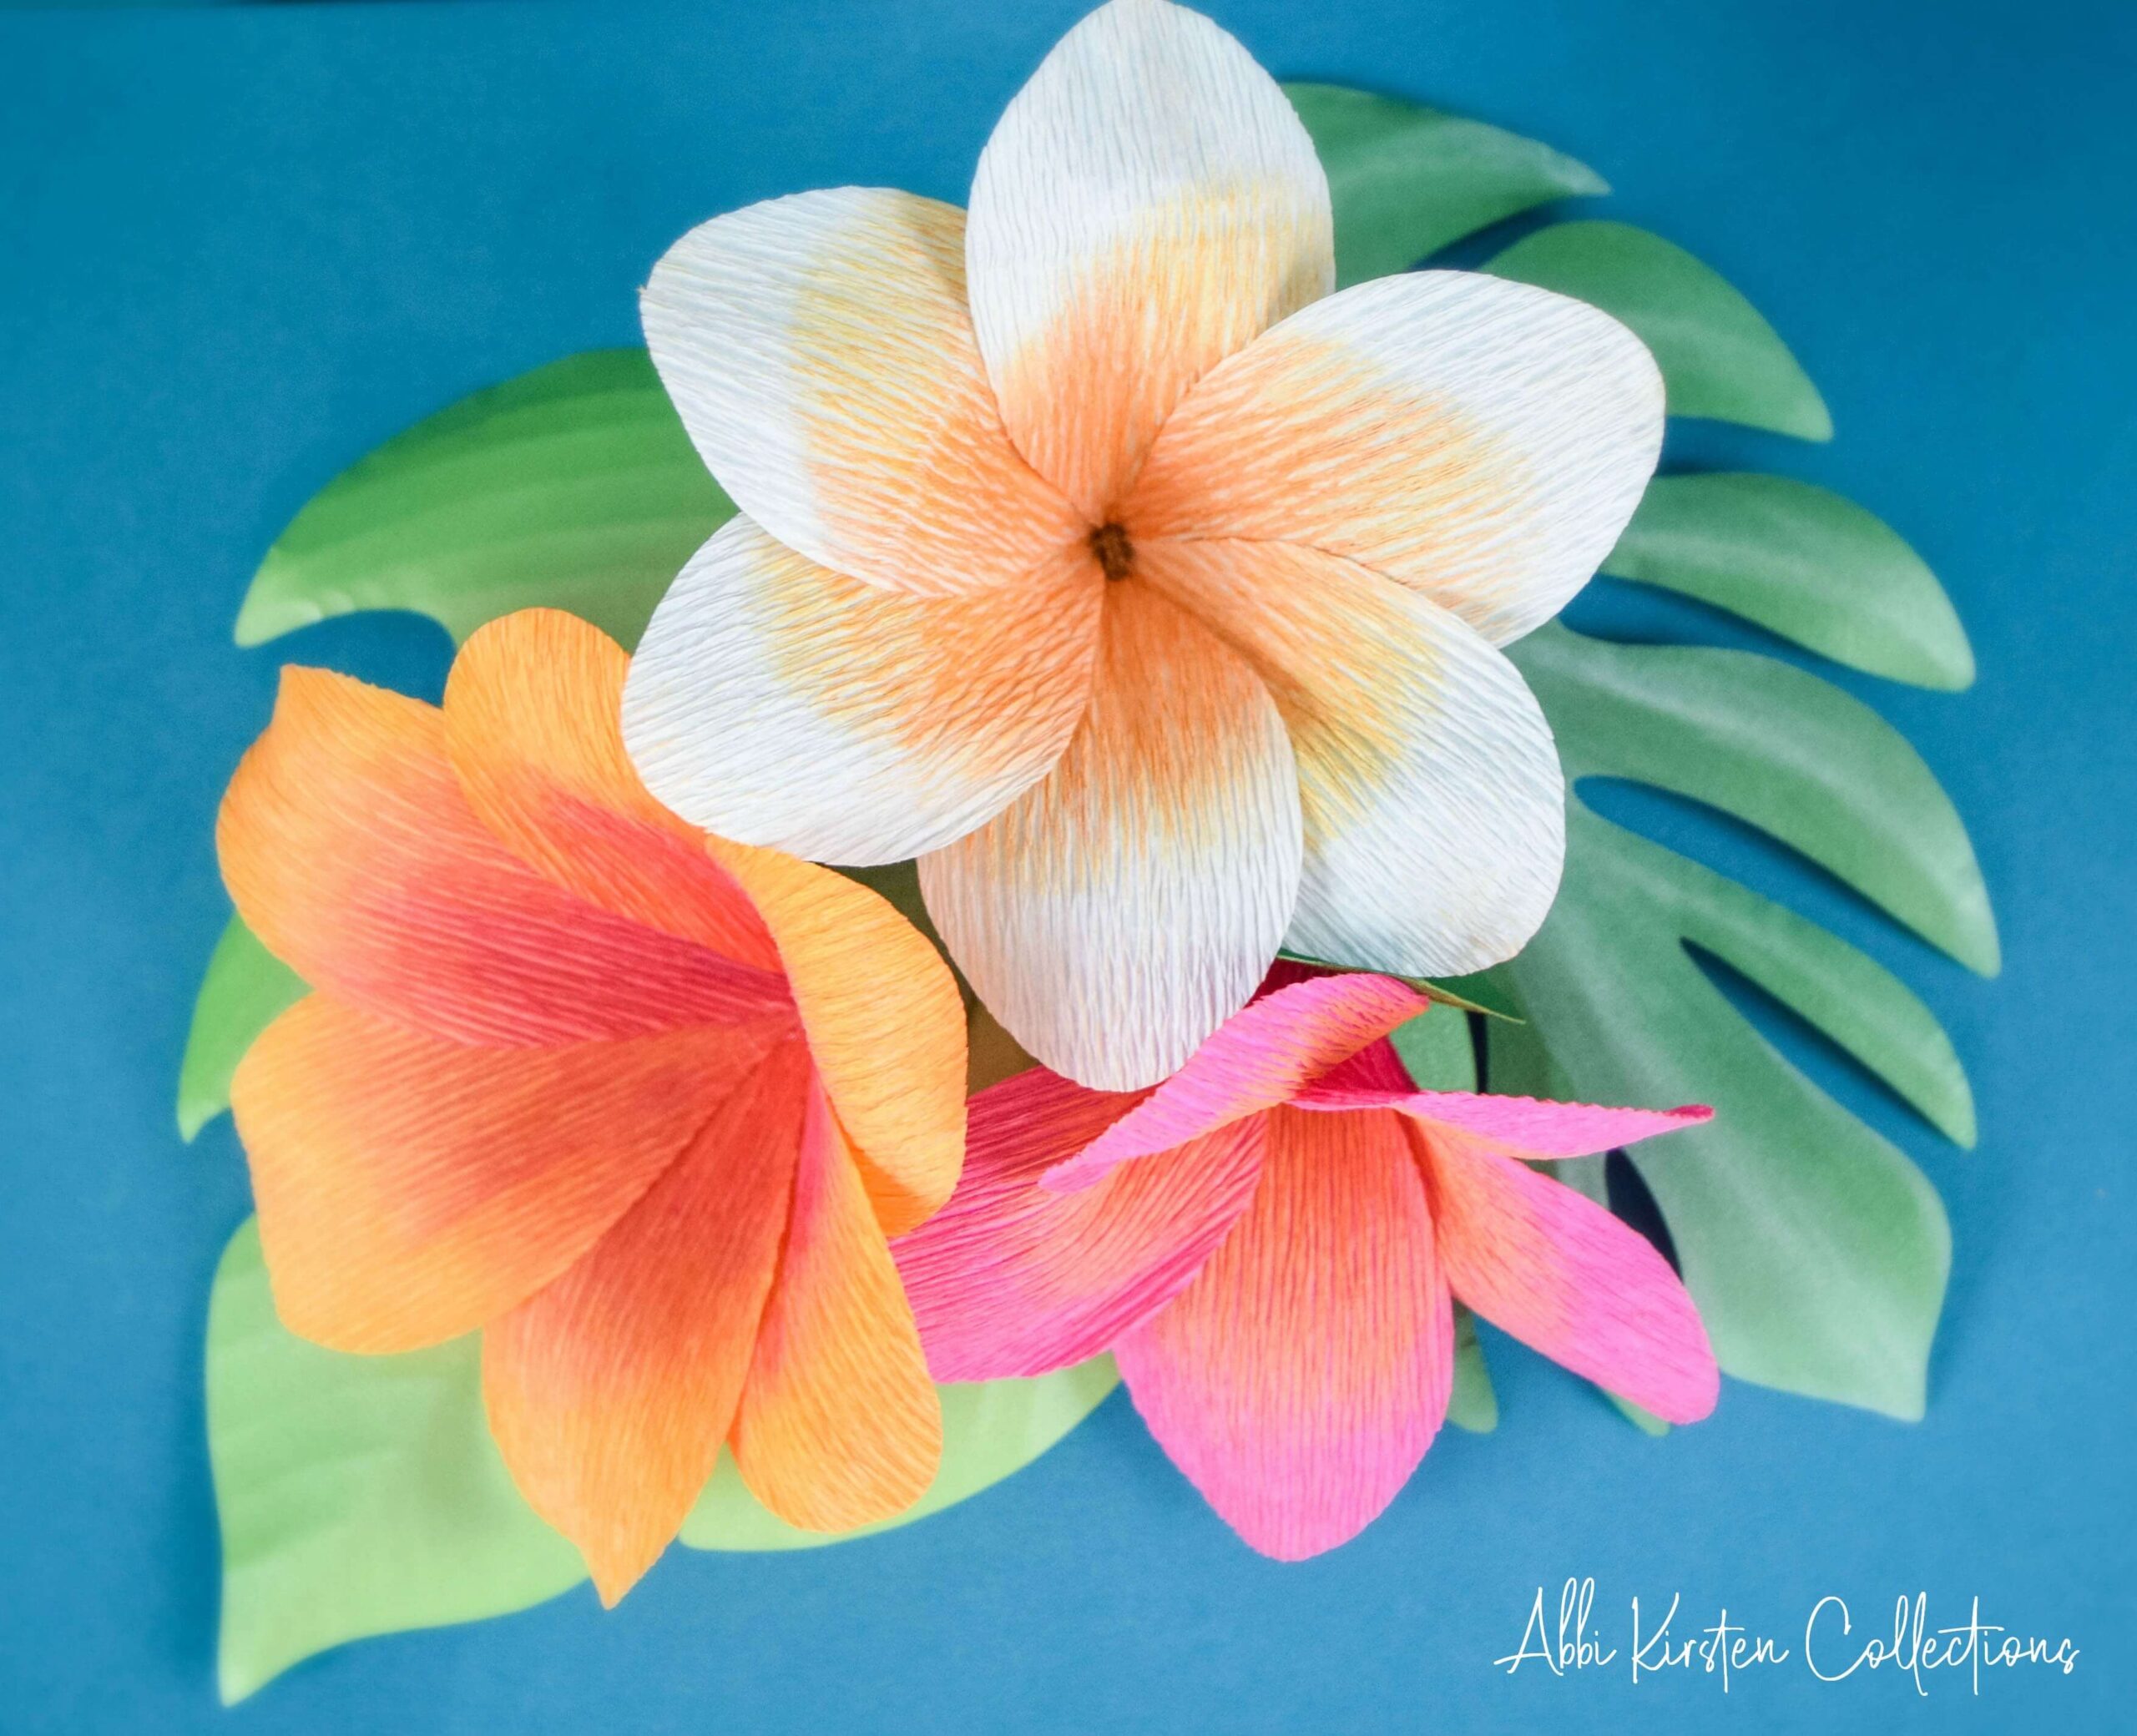 Blooming plumeria flowers and green paper leaves sit on a blue background. The Plumeria is colorful and made with crepe paper for a more realistic look. 